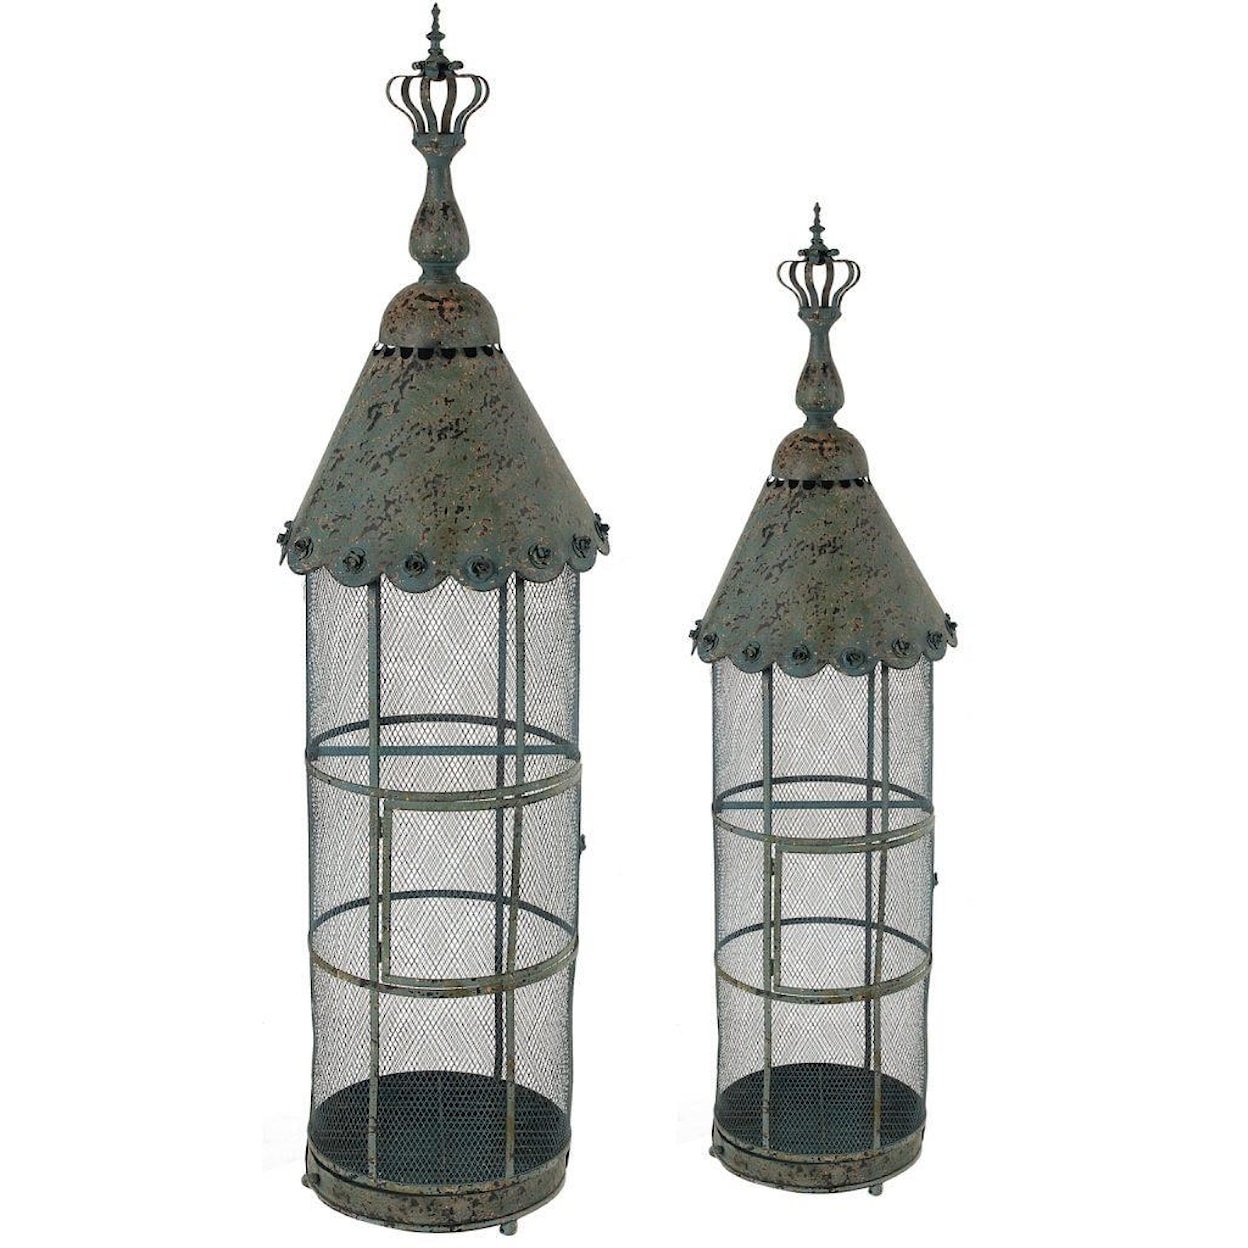 A & B Home Accessories Bird Cages Set of 2